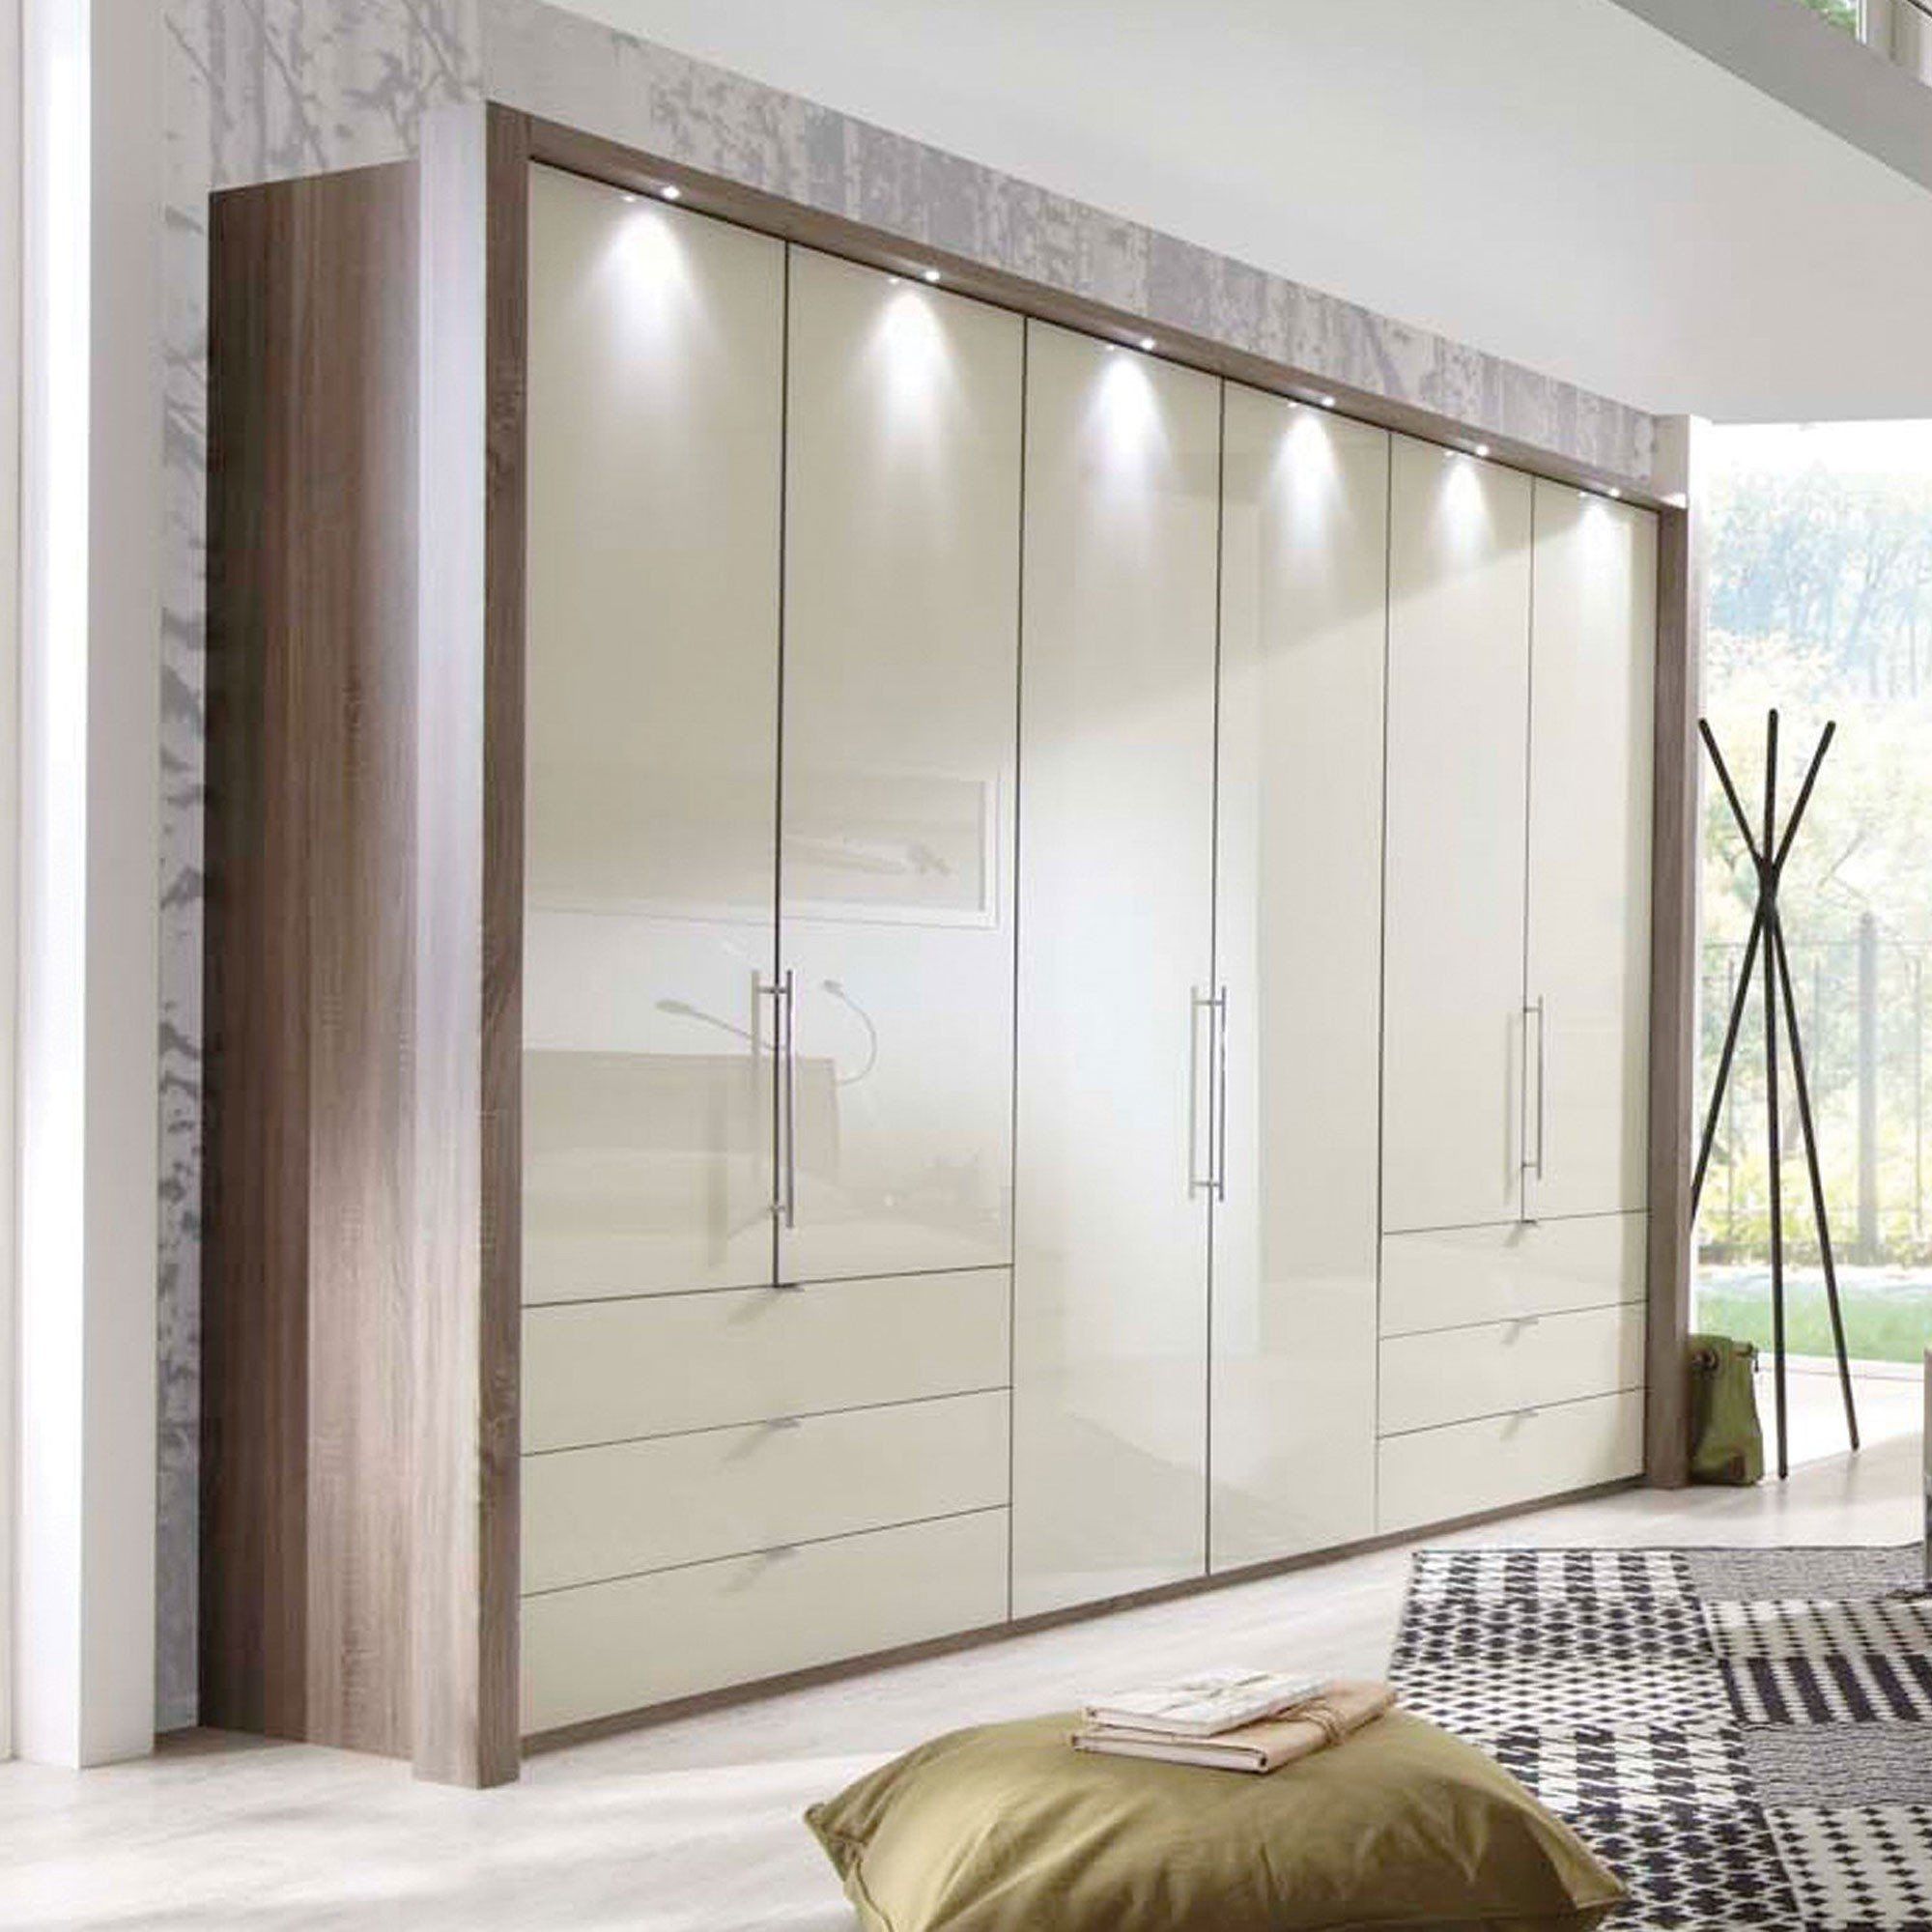 Wiemann Lake Combi Wardrobe – Fitting Included – Aldiss With Combi Wardrobes (View 2 of 15)